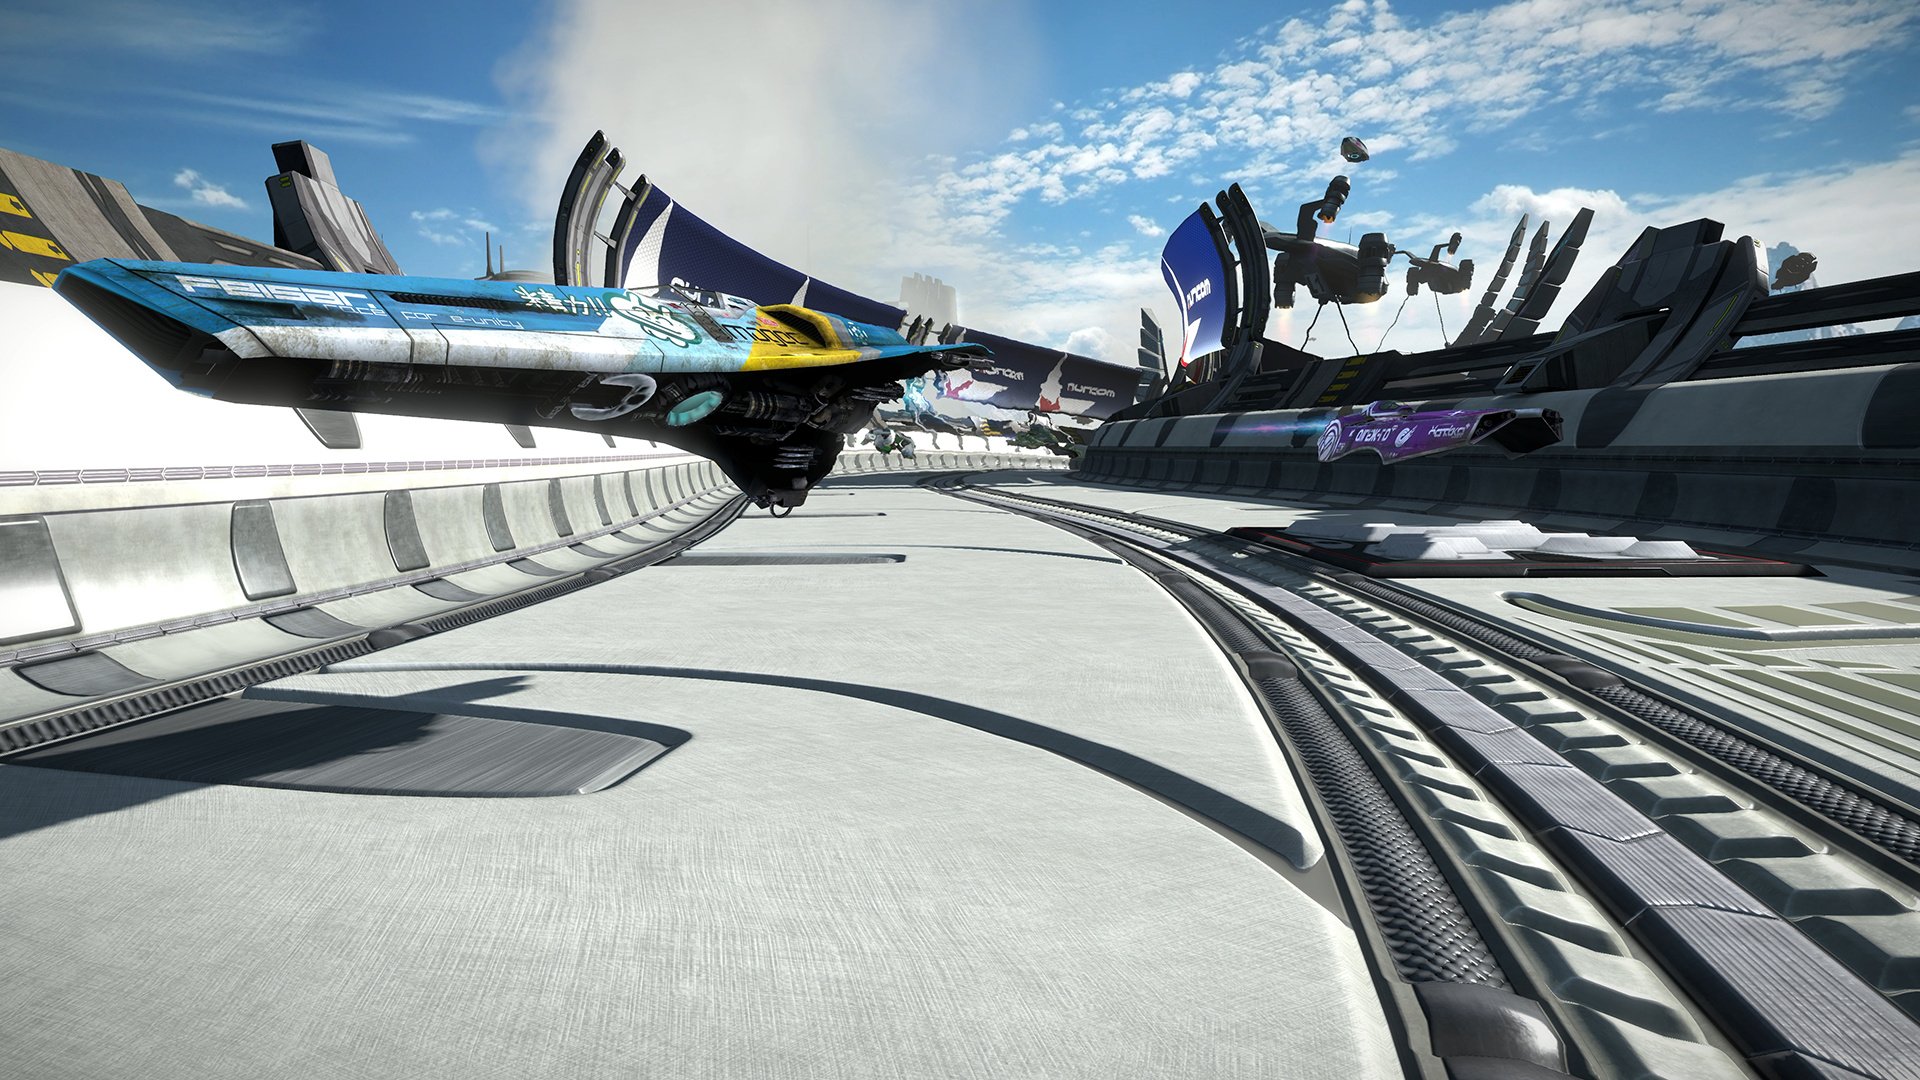 wipeout omega collection pc download password